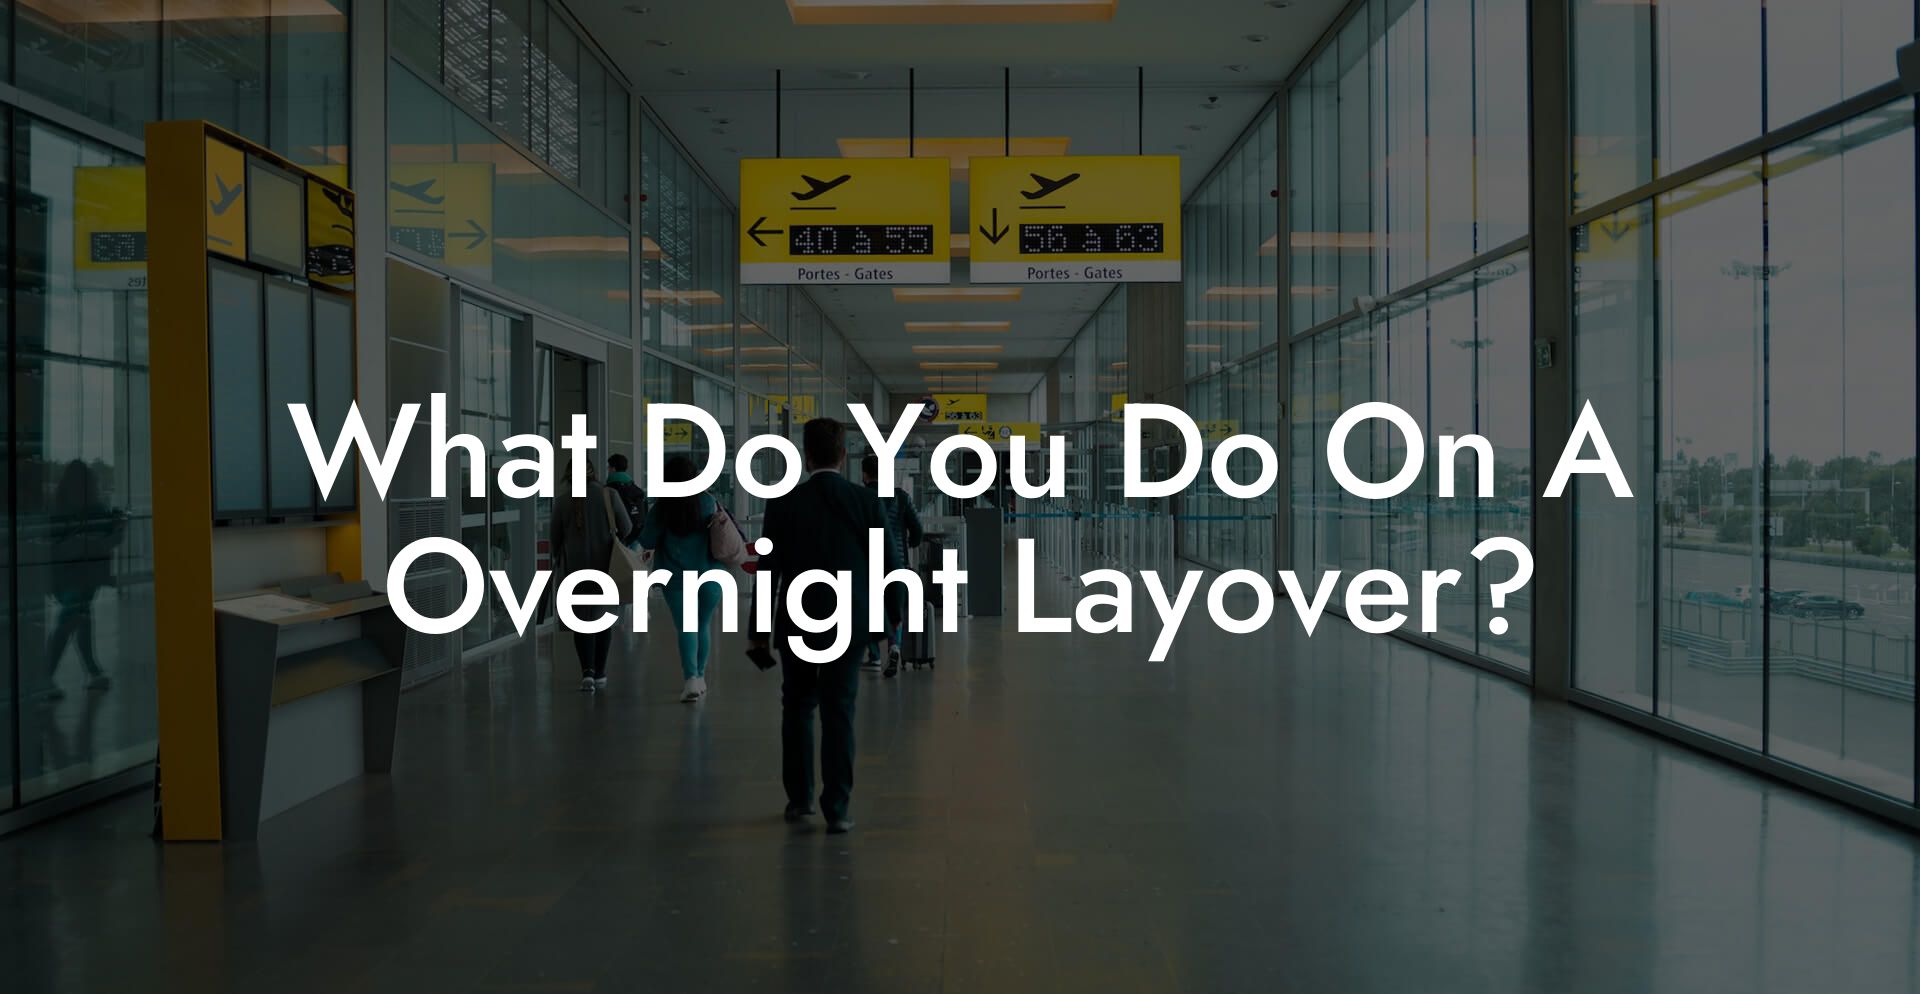 What Do You Do On A Overnight Layover?